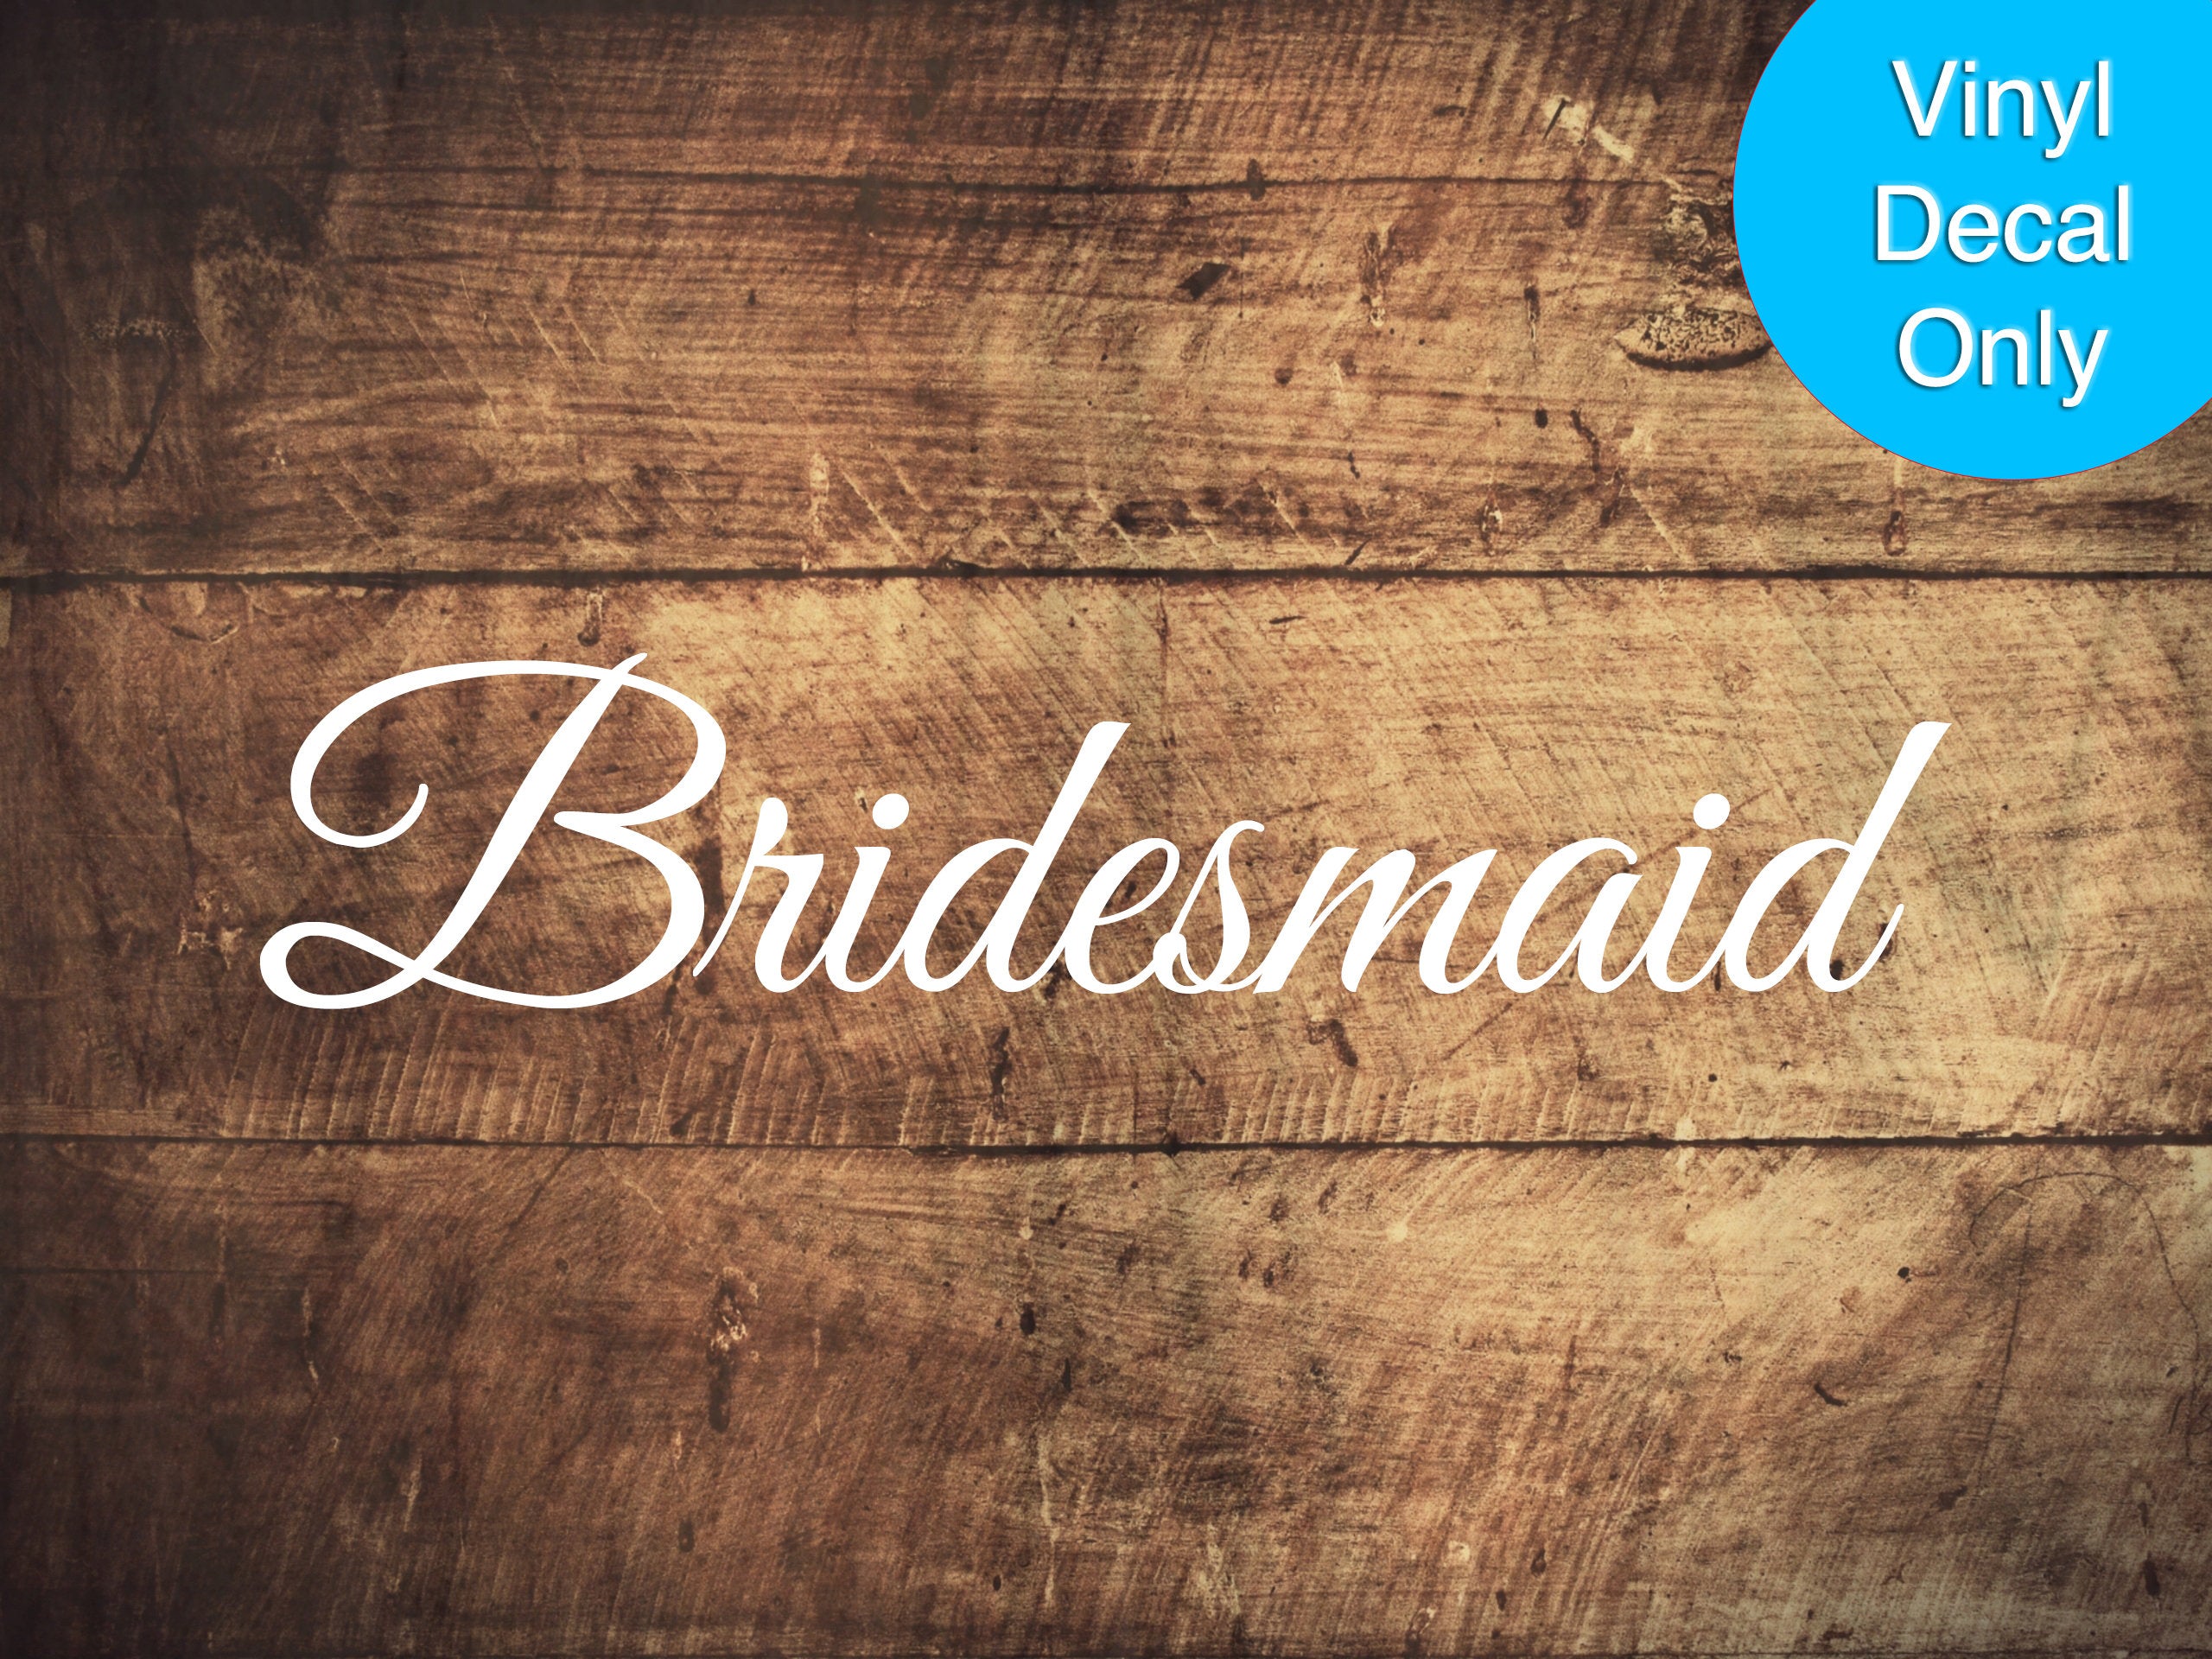 Bridesmaid - Vinyl Decal for Signs